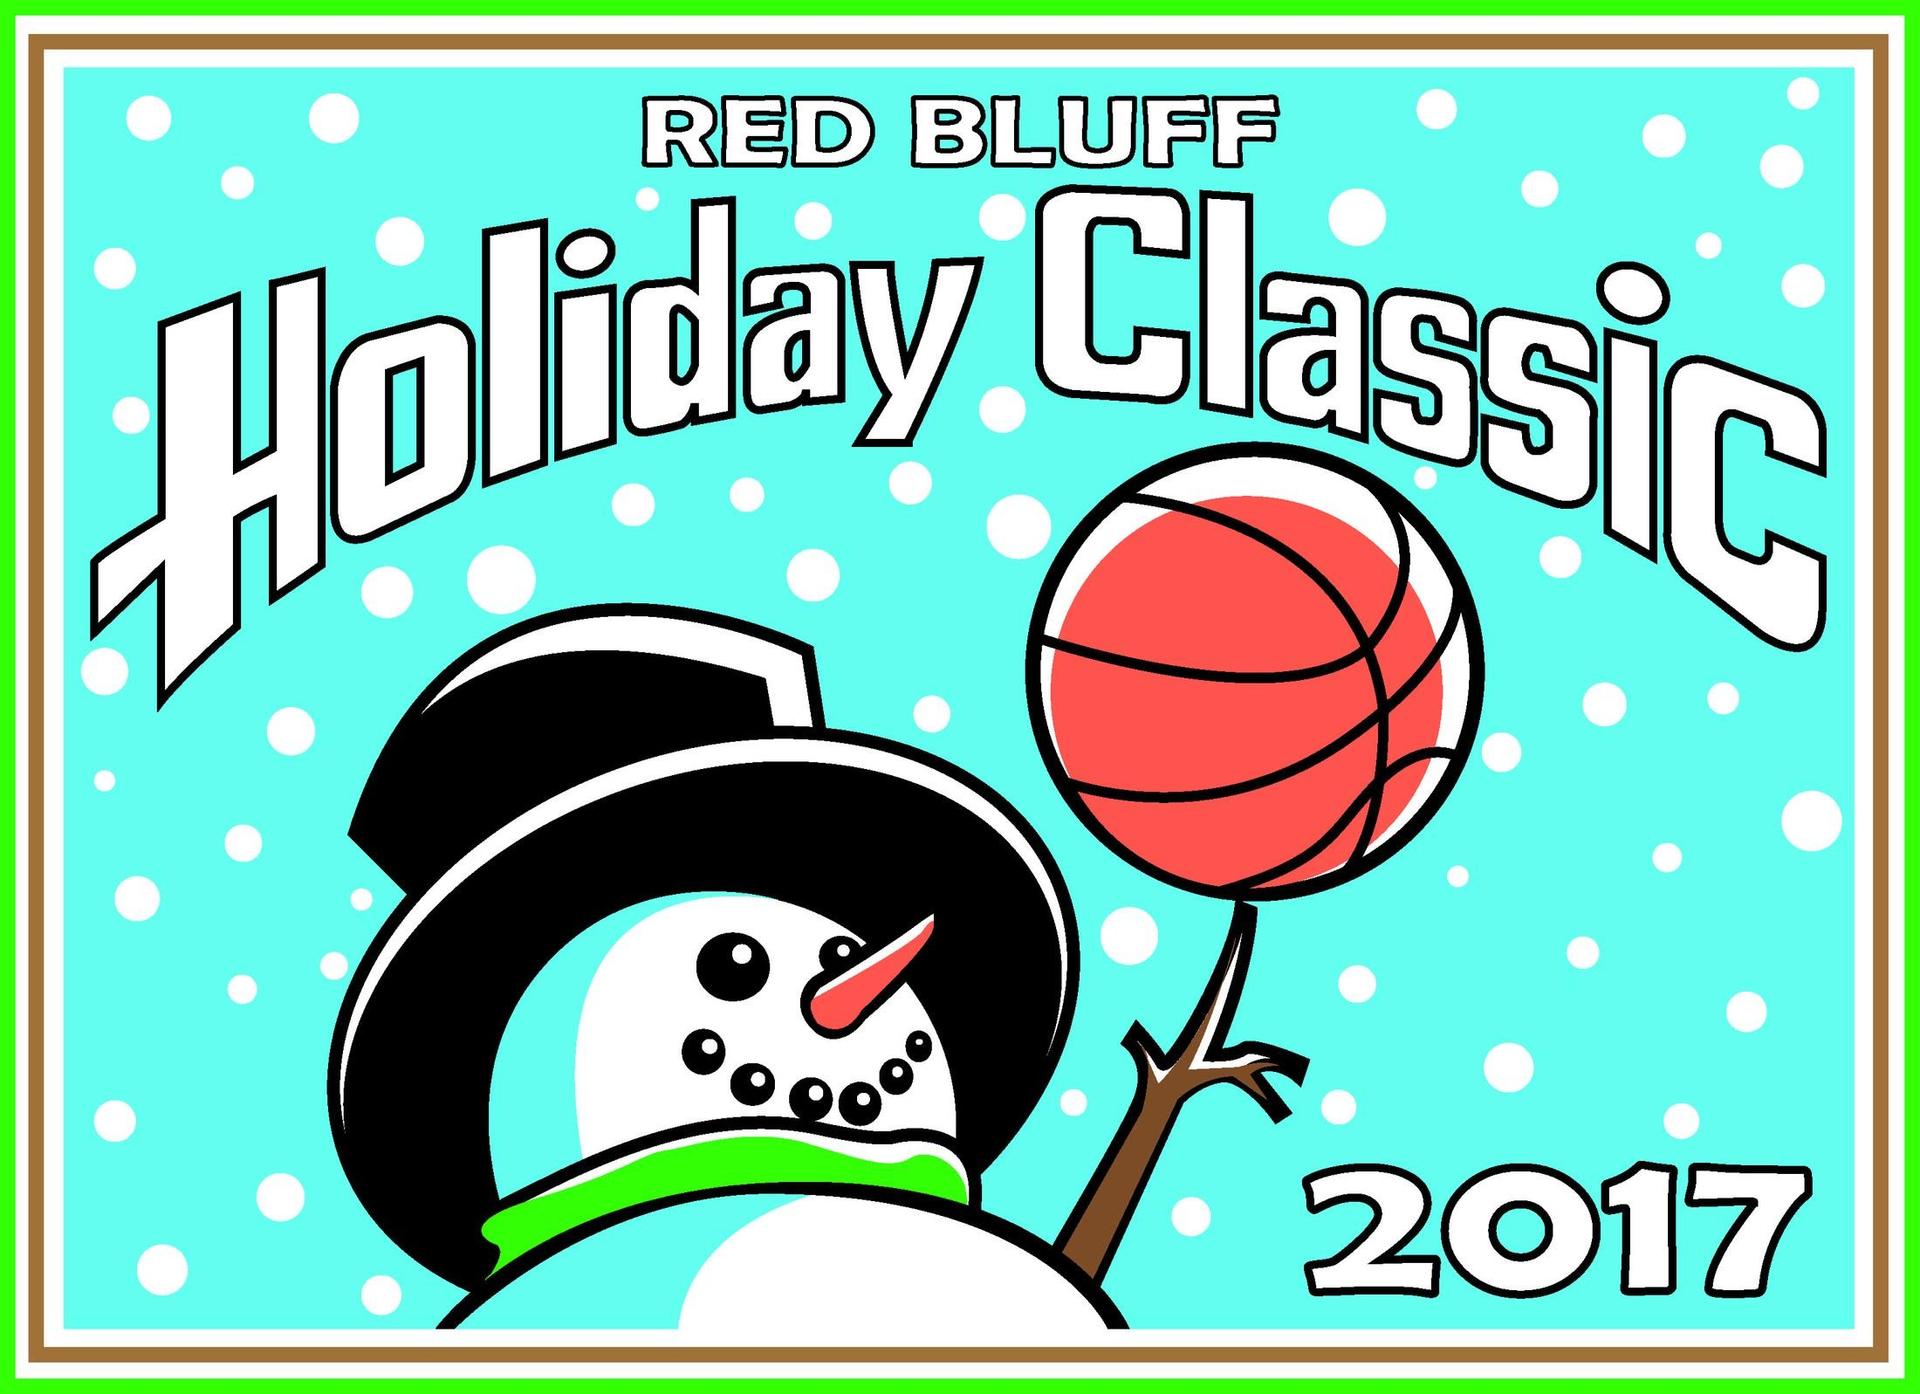 2017 Holiday classic snowman with basketball